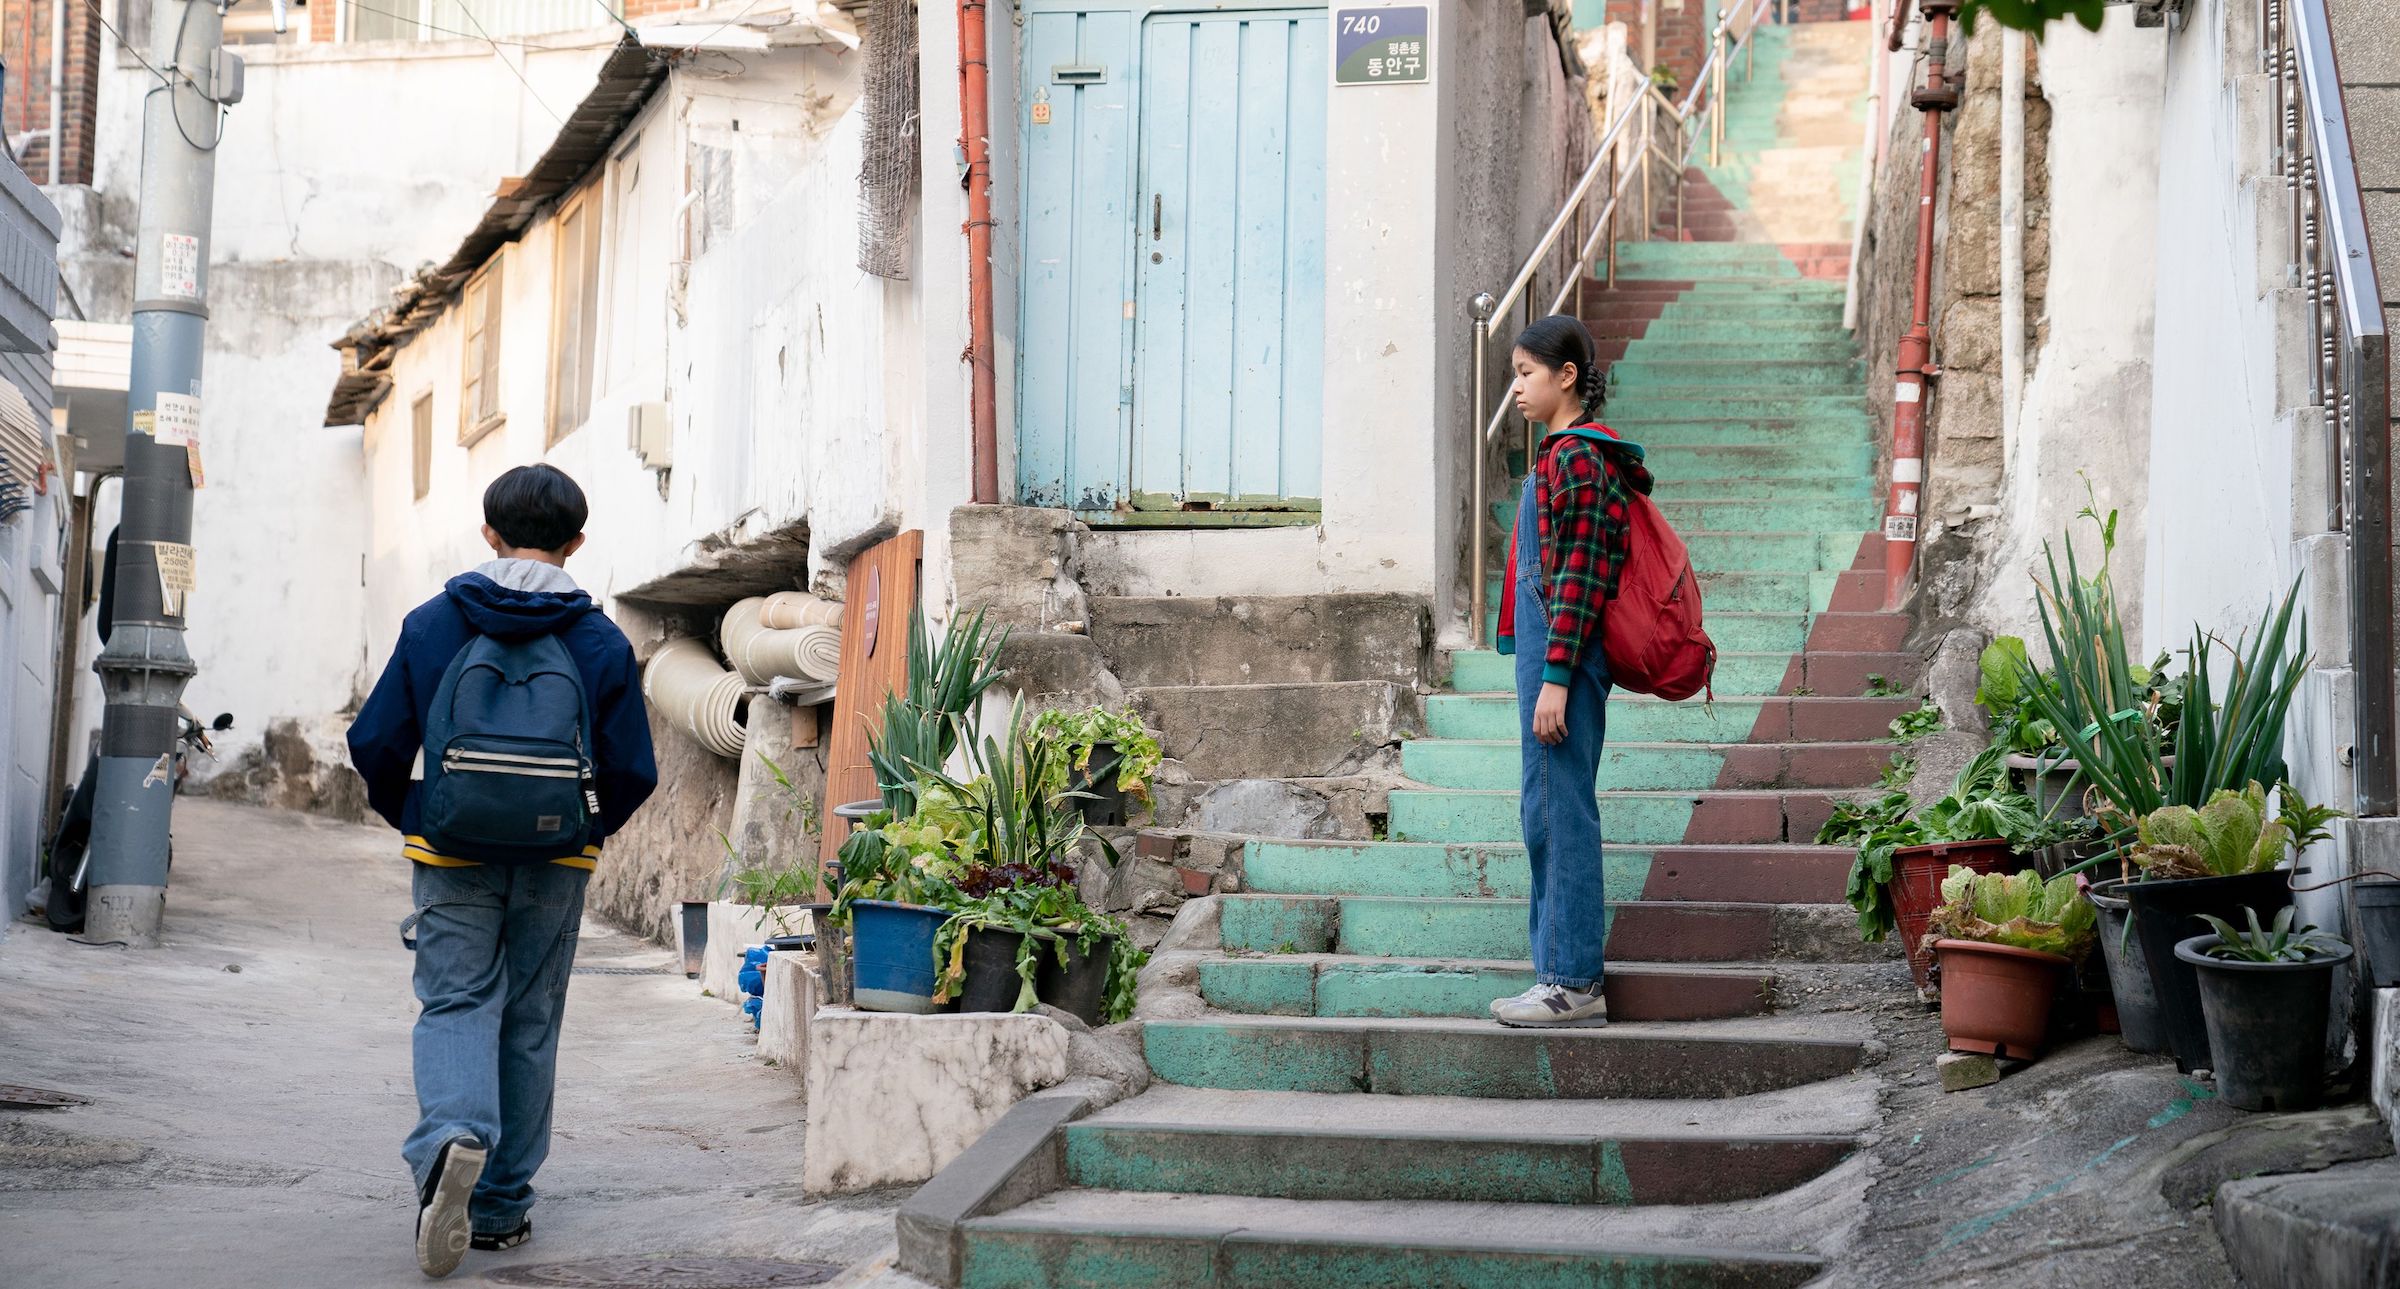 Young Hae Sung (Leem Seung-min) and young Nora (Moon Seung-ah) part ways on the walk home from school in Seoul. (Courtesy of A24)